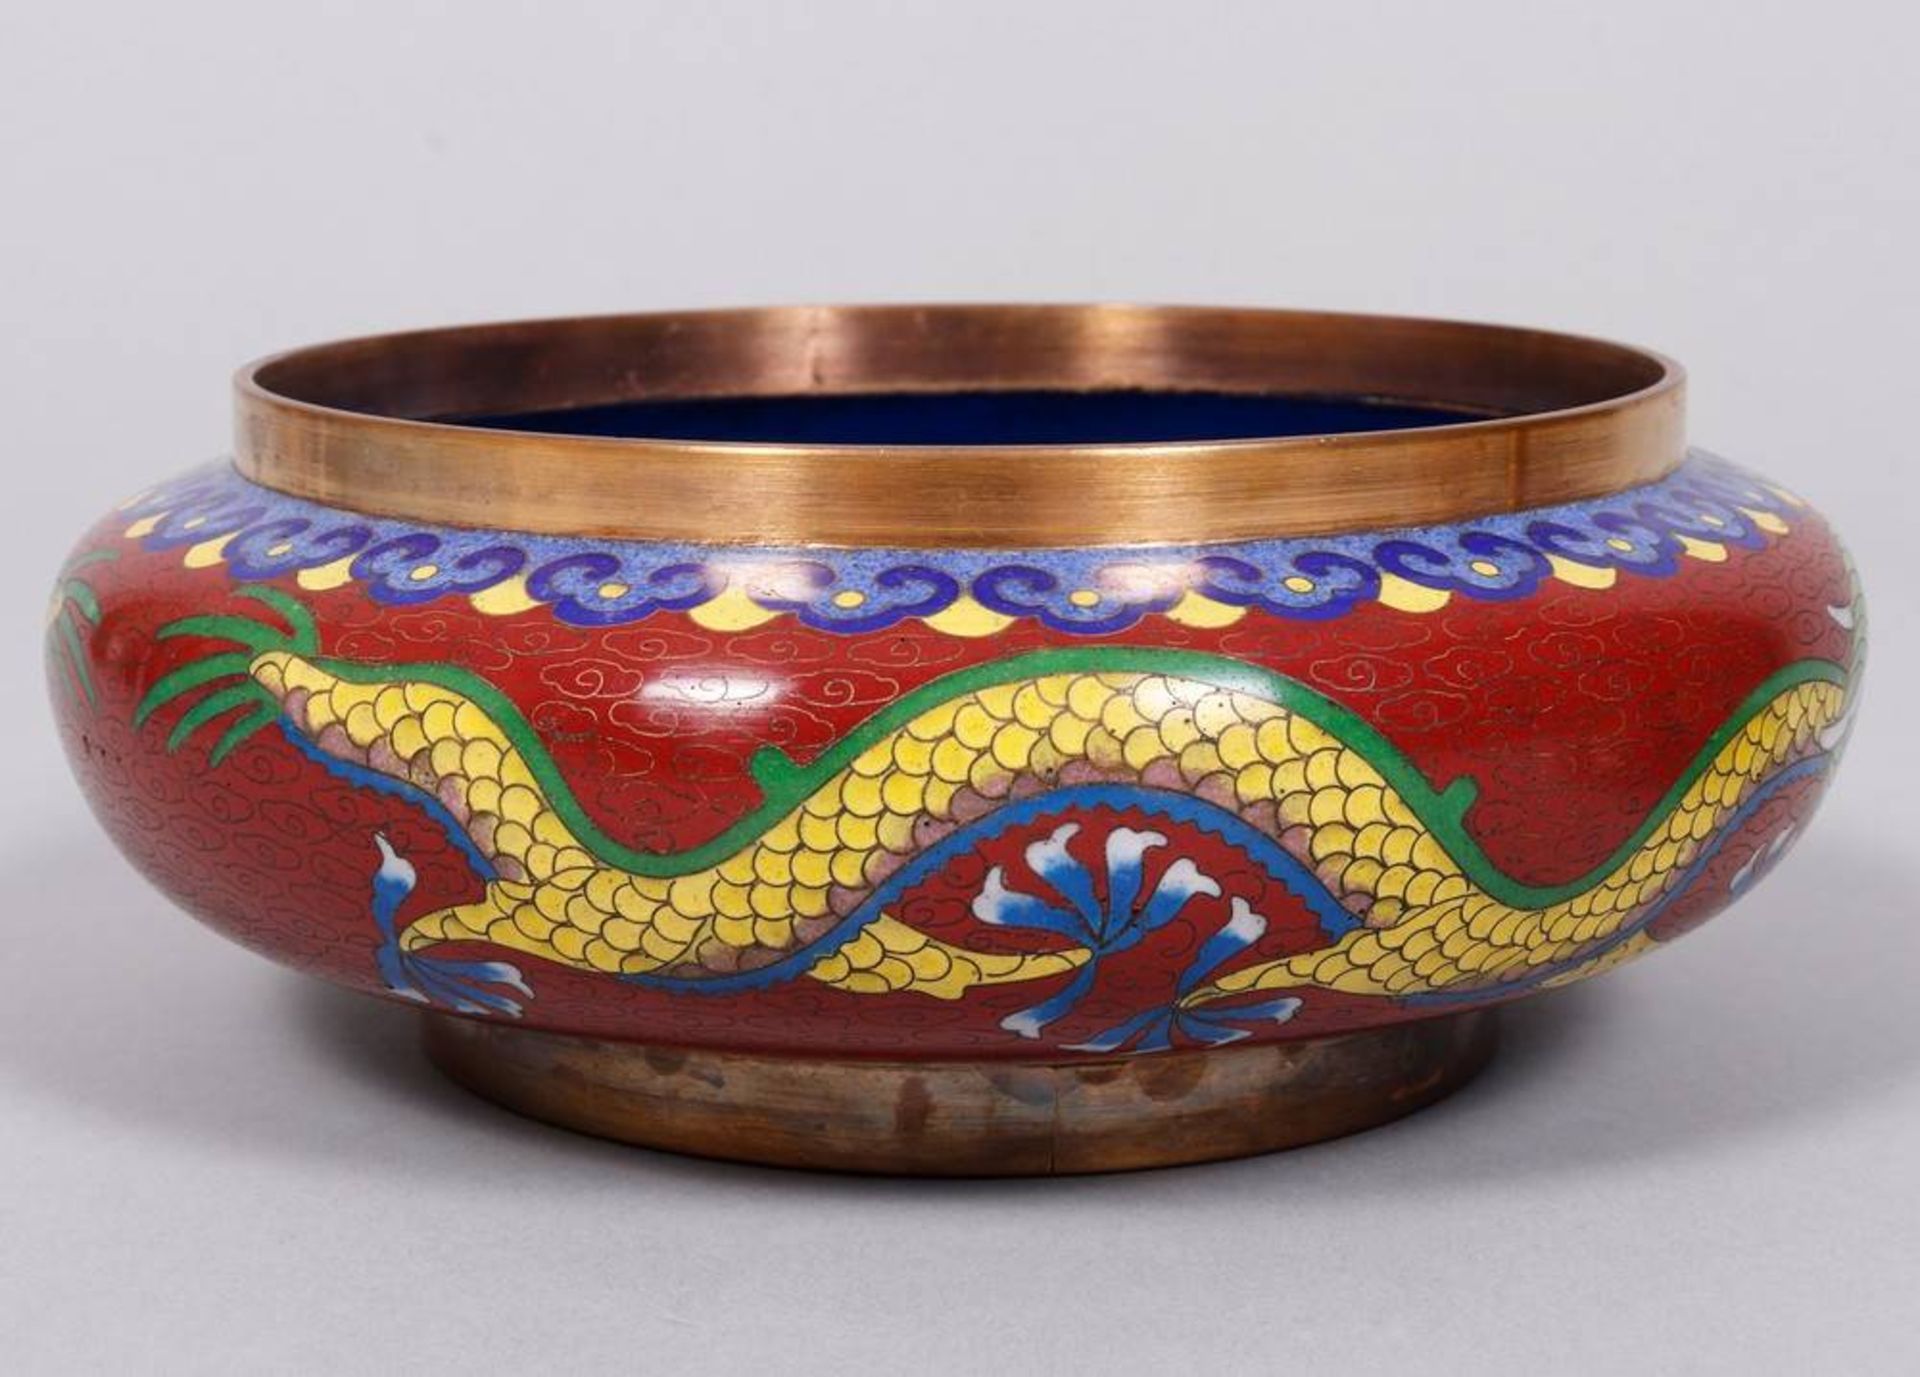 Cloisonné lidded jar, China, probably Republic Period - Image 5 of 6